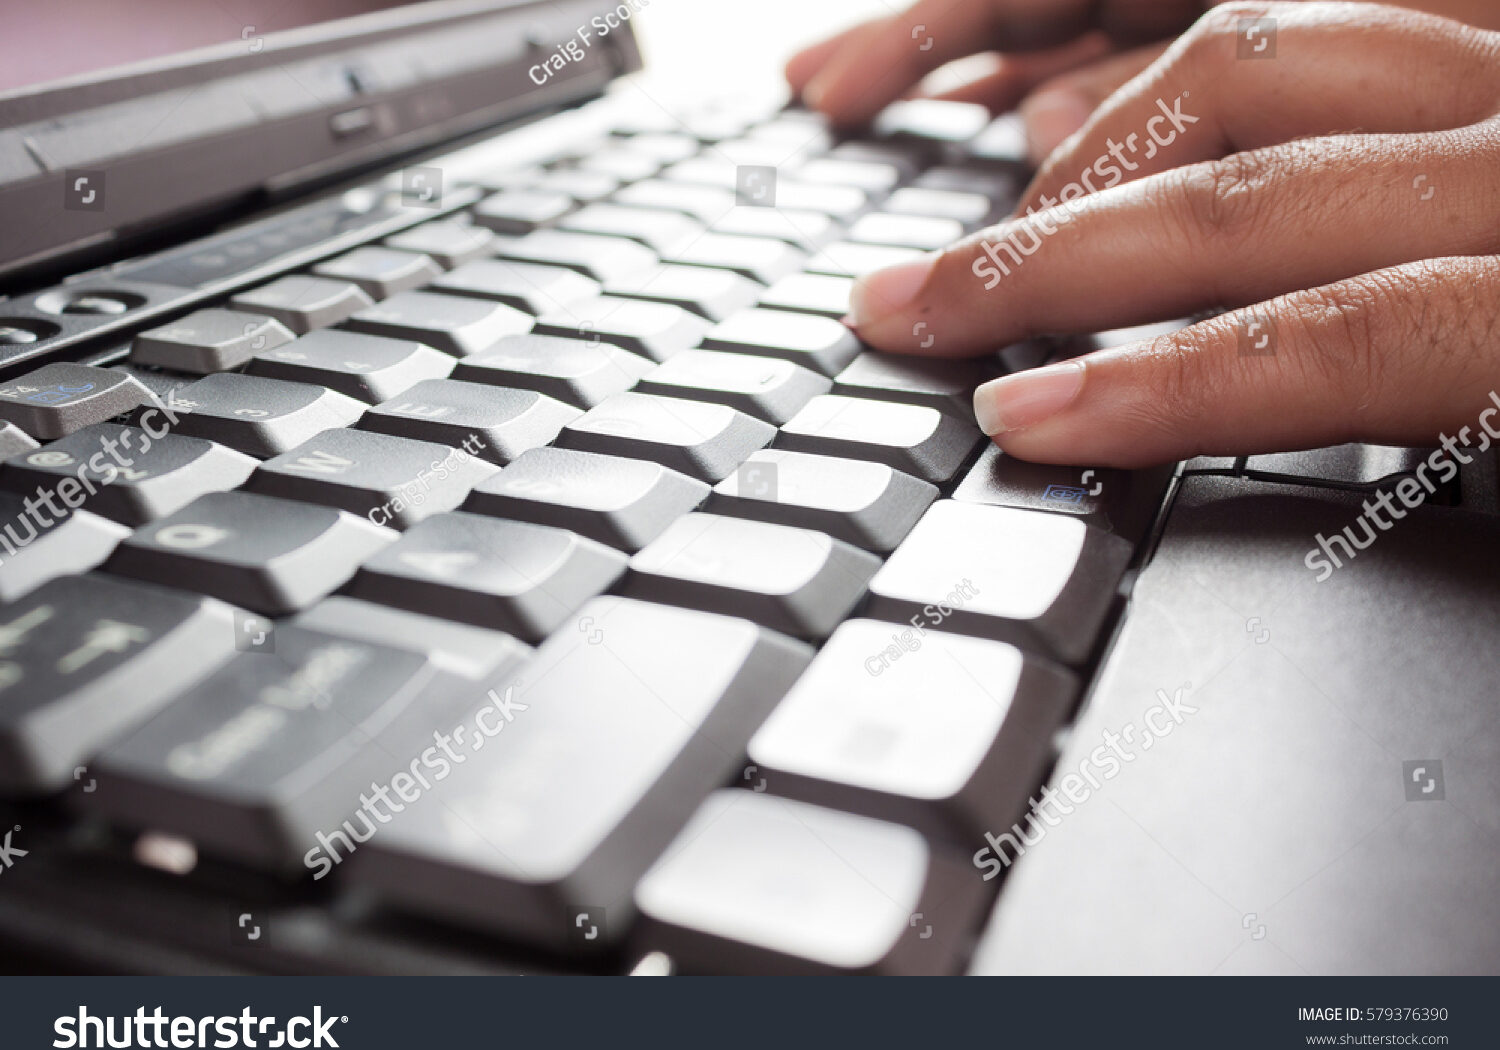 stock-photo-hands-typing-on-keyboard-579376390